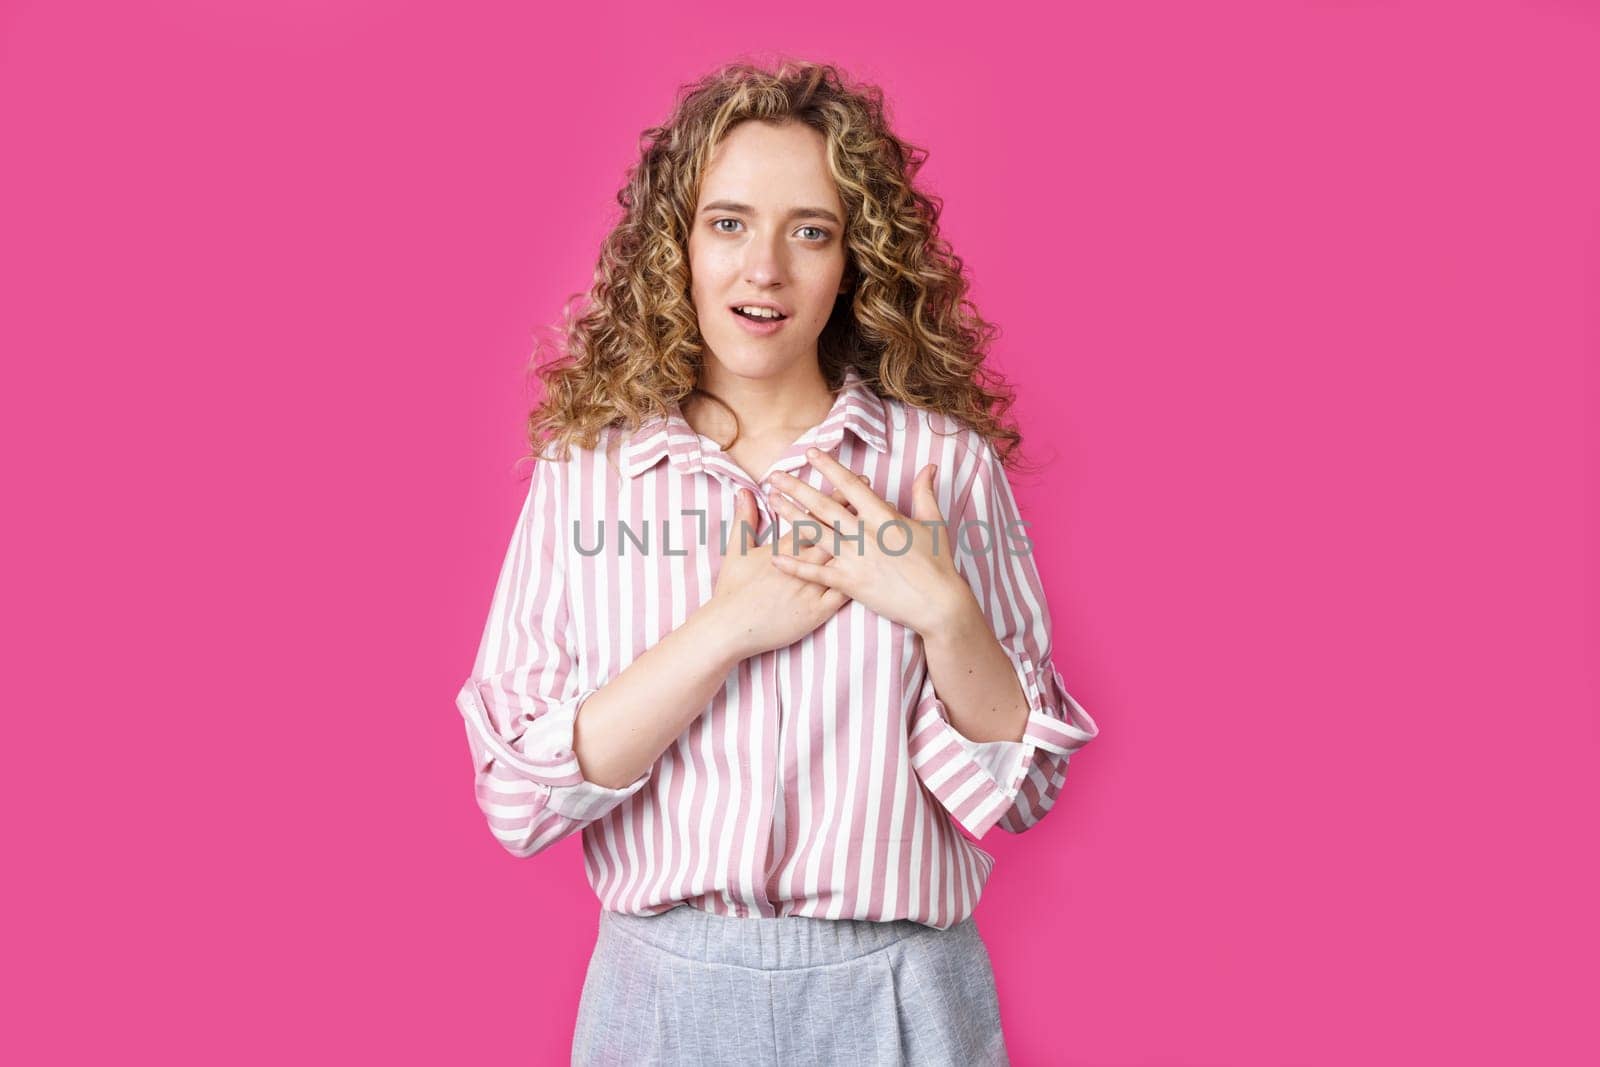 The woman holds her hands on her heart, wearing a striped shirt, expresses gratitude, has a friendly expression on her face. Isolated on pink background